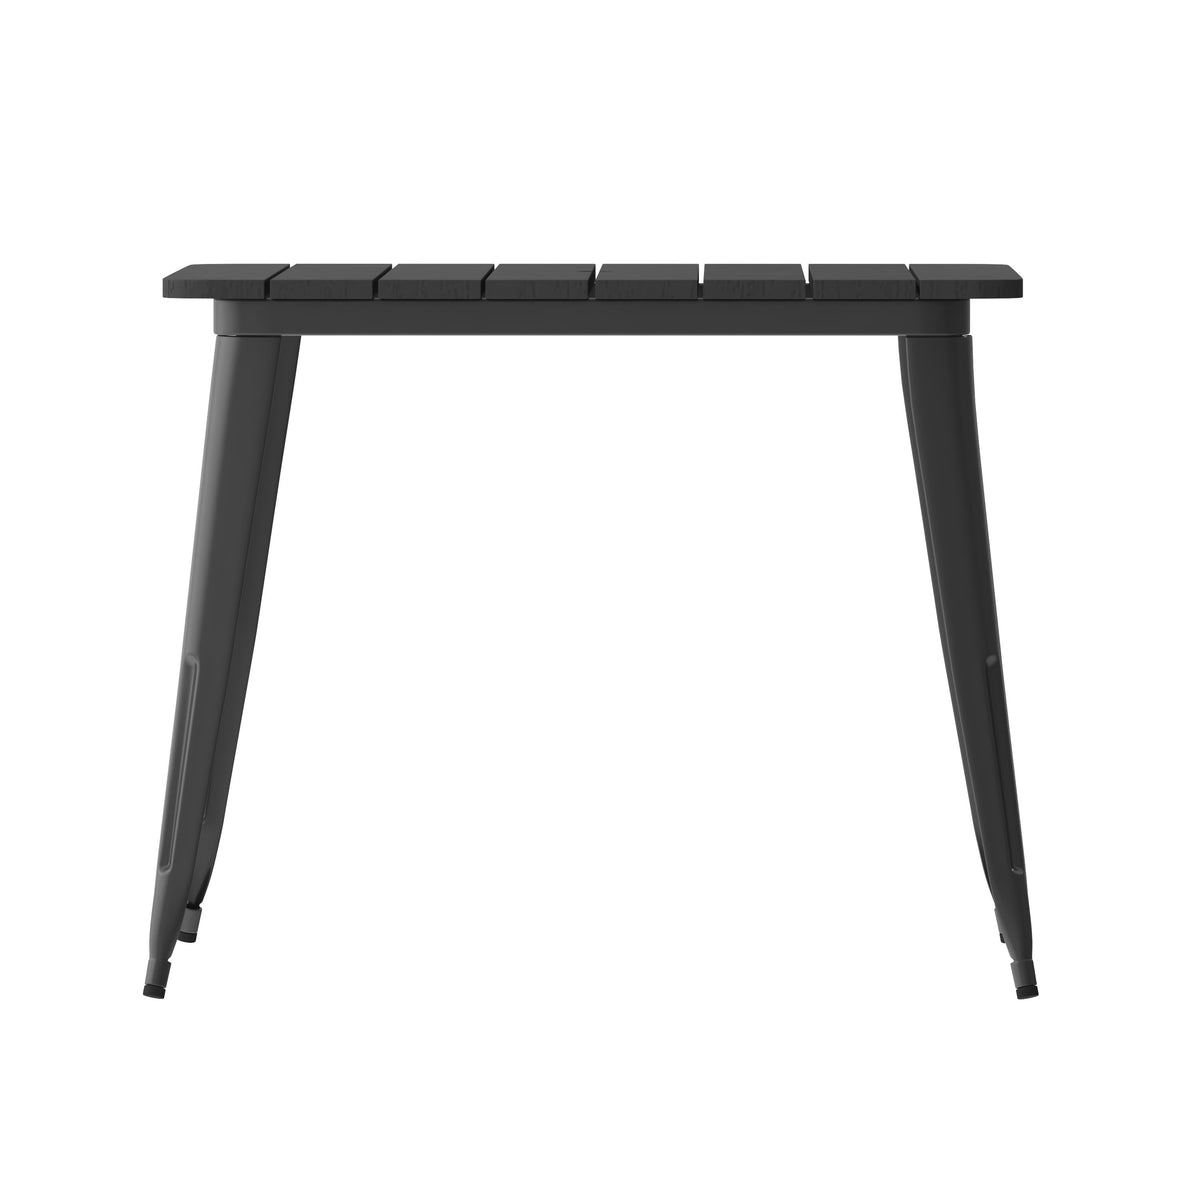 Black |#| 36inch SQ Commercial Poly Resin Restaurant Table with Umbrella Hole - Black/Black